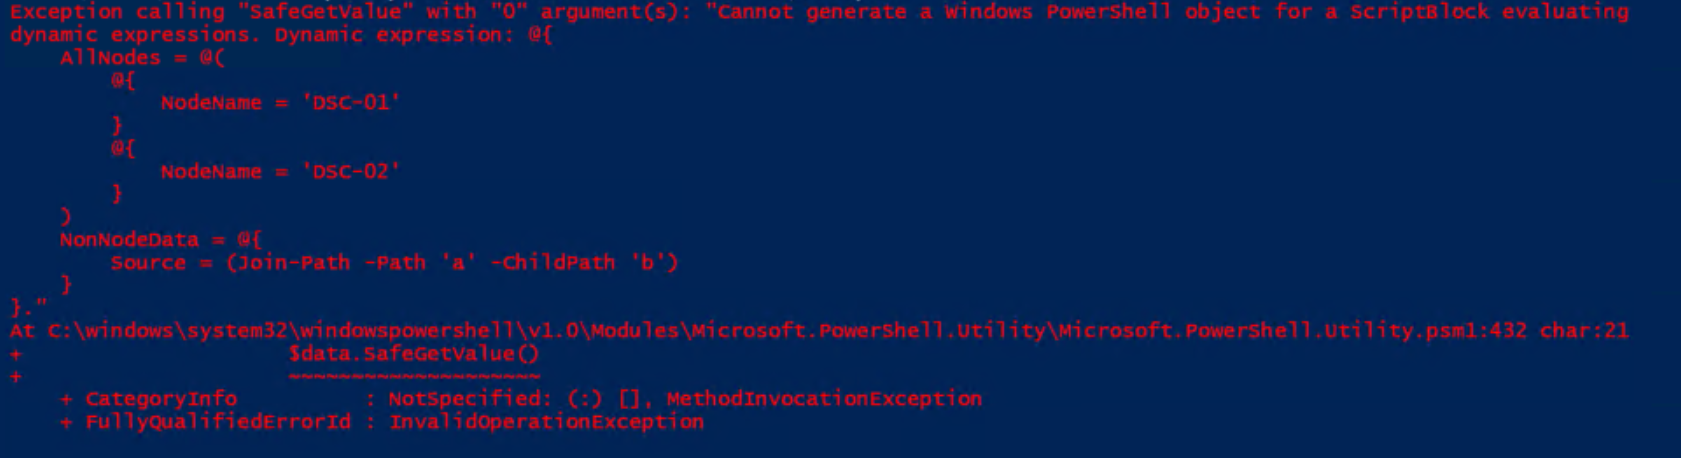 Exception caused by importing a PowerShell data file containing code